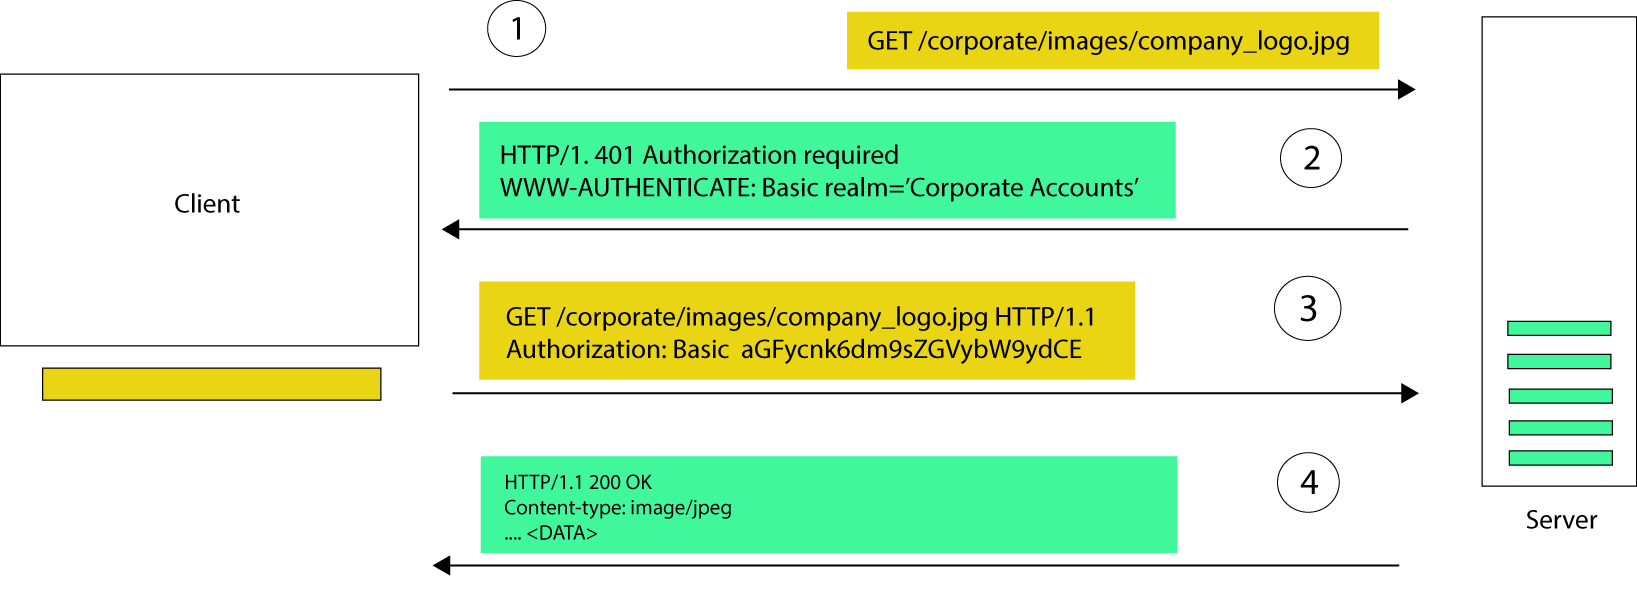 A simplified model of basic auth…